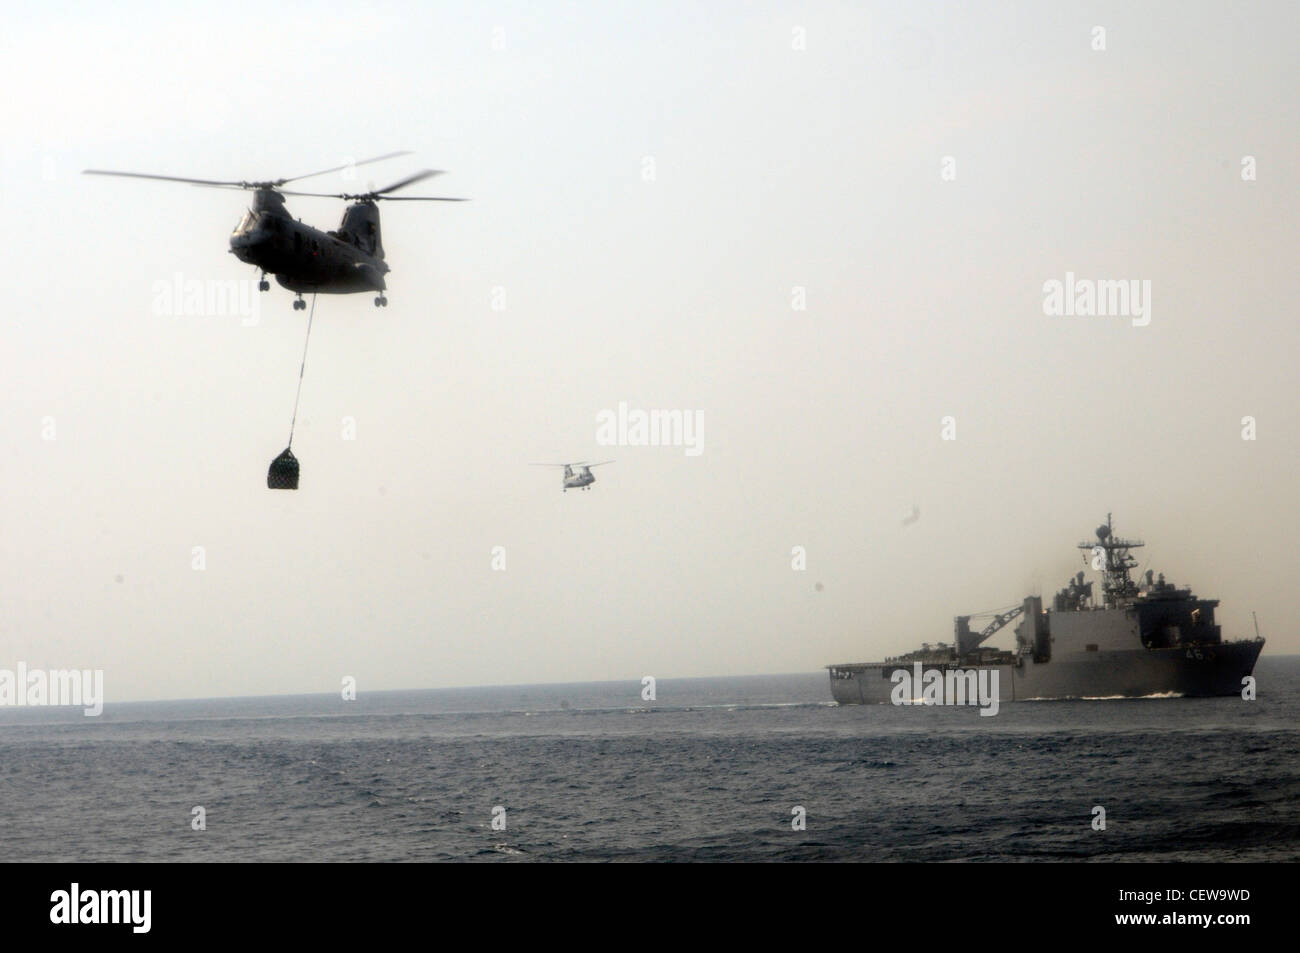 CH-46 Sea Knights circle the air during a replenishment at sea between the forward-deployed amphibious dock landing ship USS Germantown (LSD 42), USS Tortuga (LSD 46) and USNS Tippecanoe (T-AO-199). Germantown, with embarked elements of the 31st Marine Expeditionary Unit (31st MEU,) is currently underway after participating in Exercise Cobra Gold 2012, an annual Thai-U.S. co-sponsored joint and multinational exercise designed to advance security throughout the Asia-Pacific region and enhance interoperability with participating nations. Stock Photo